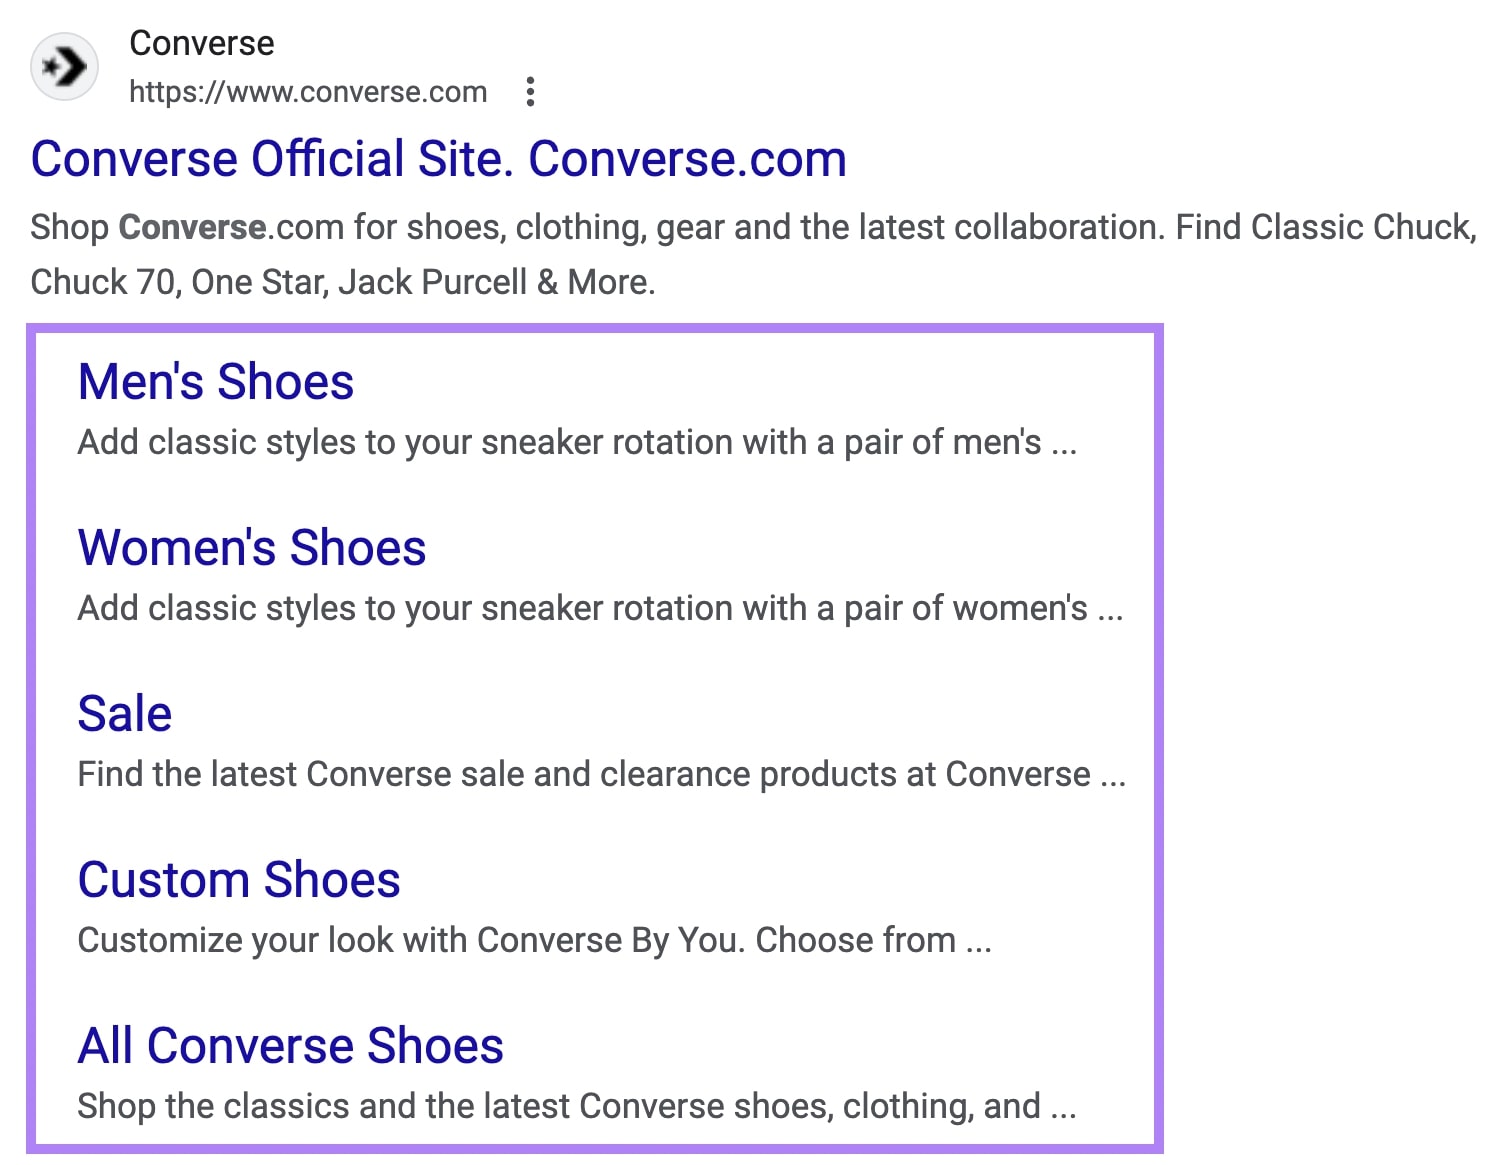 Google search result for the brand Converse showing 5 sitelinks under the listing.